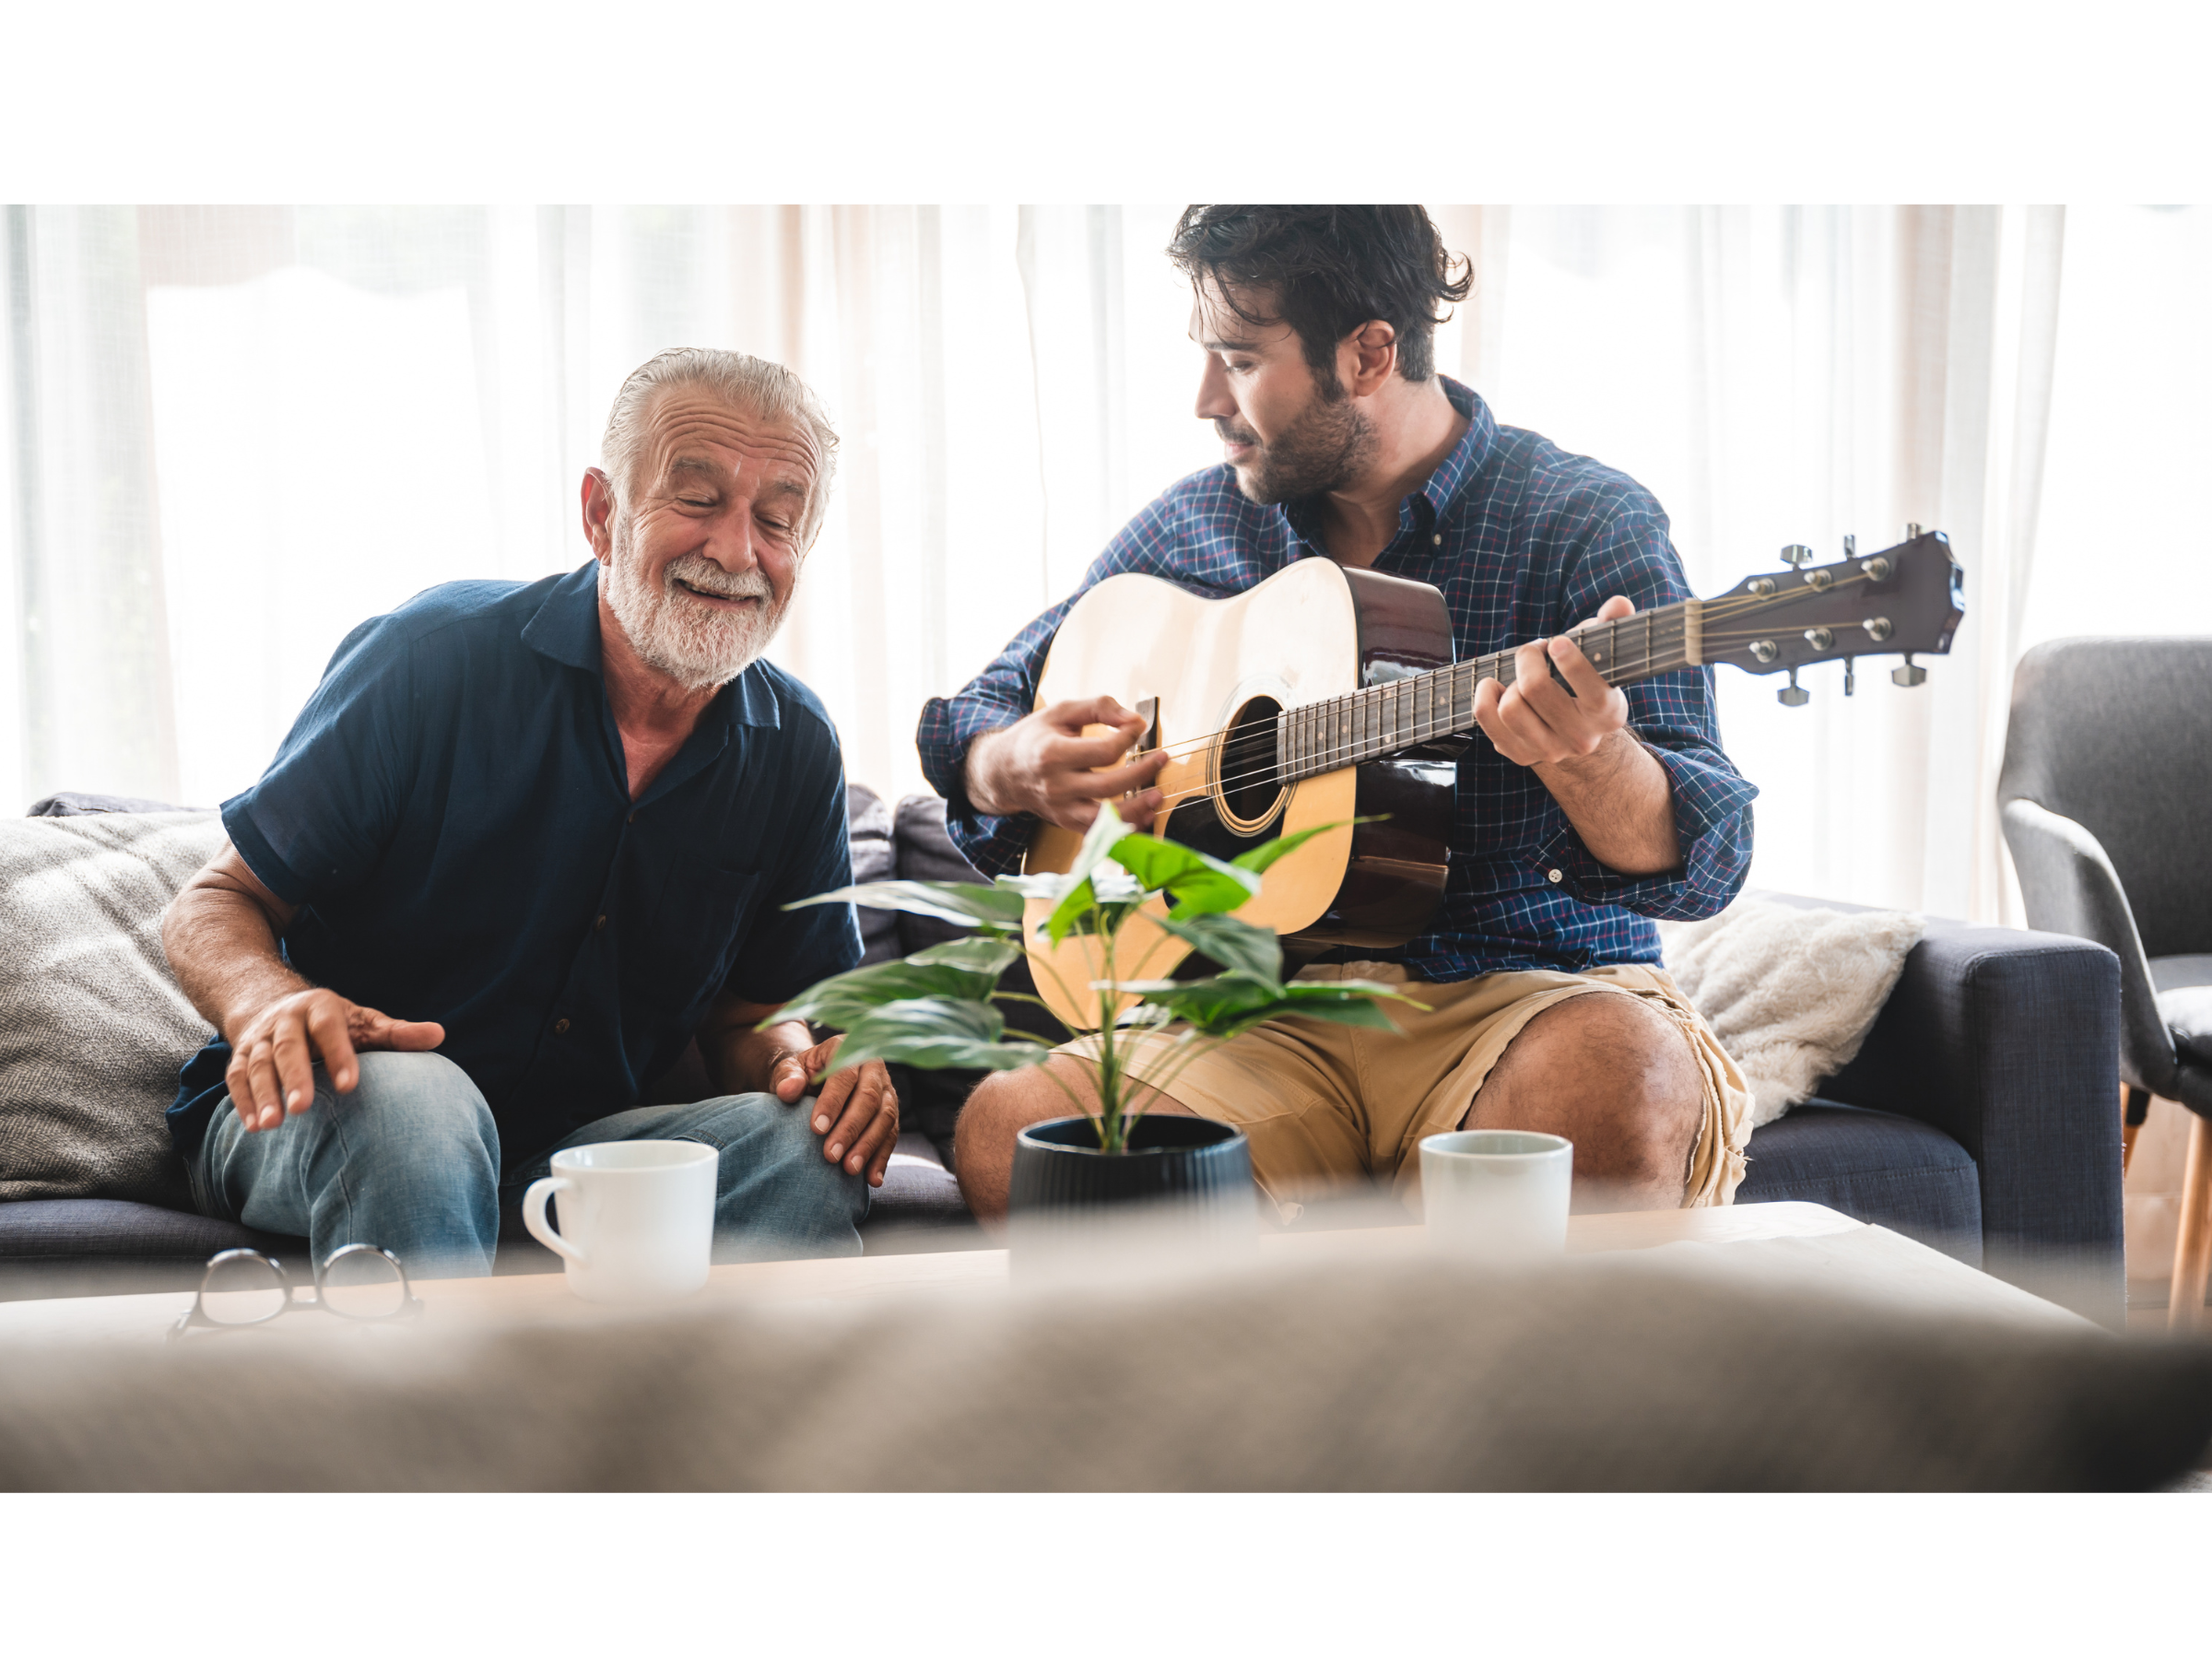 At-home musical training improves older adults’ short-term memory for faces, controlled study finds